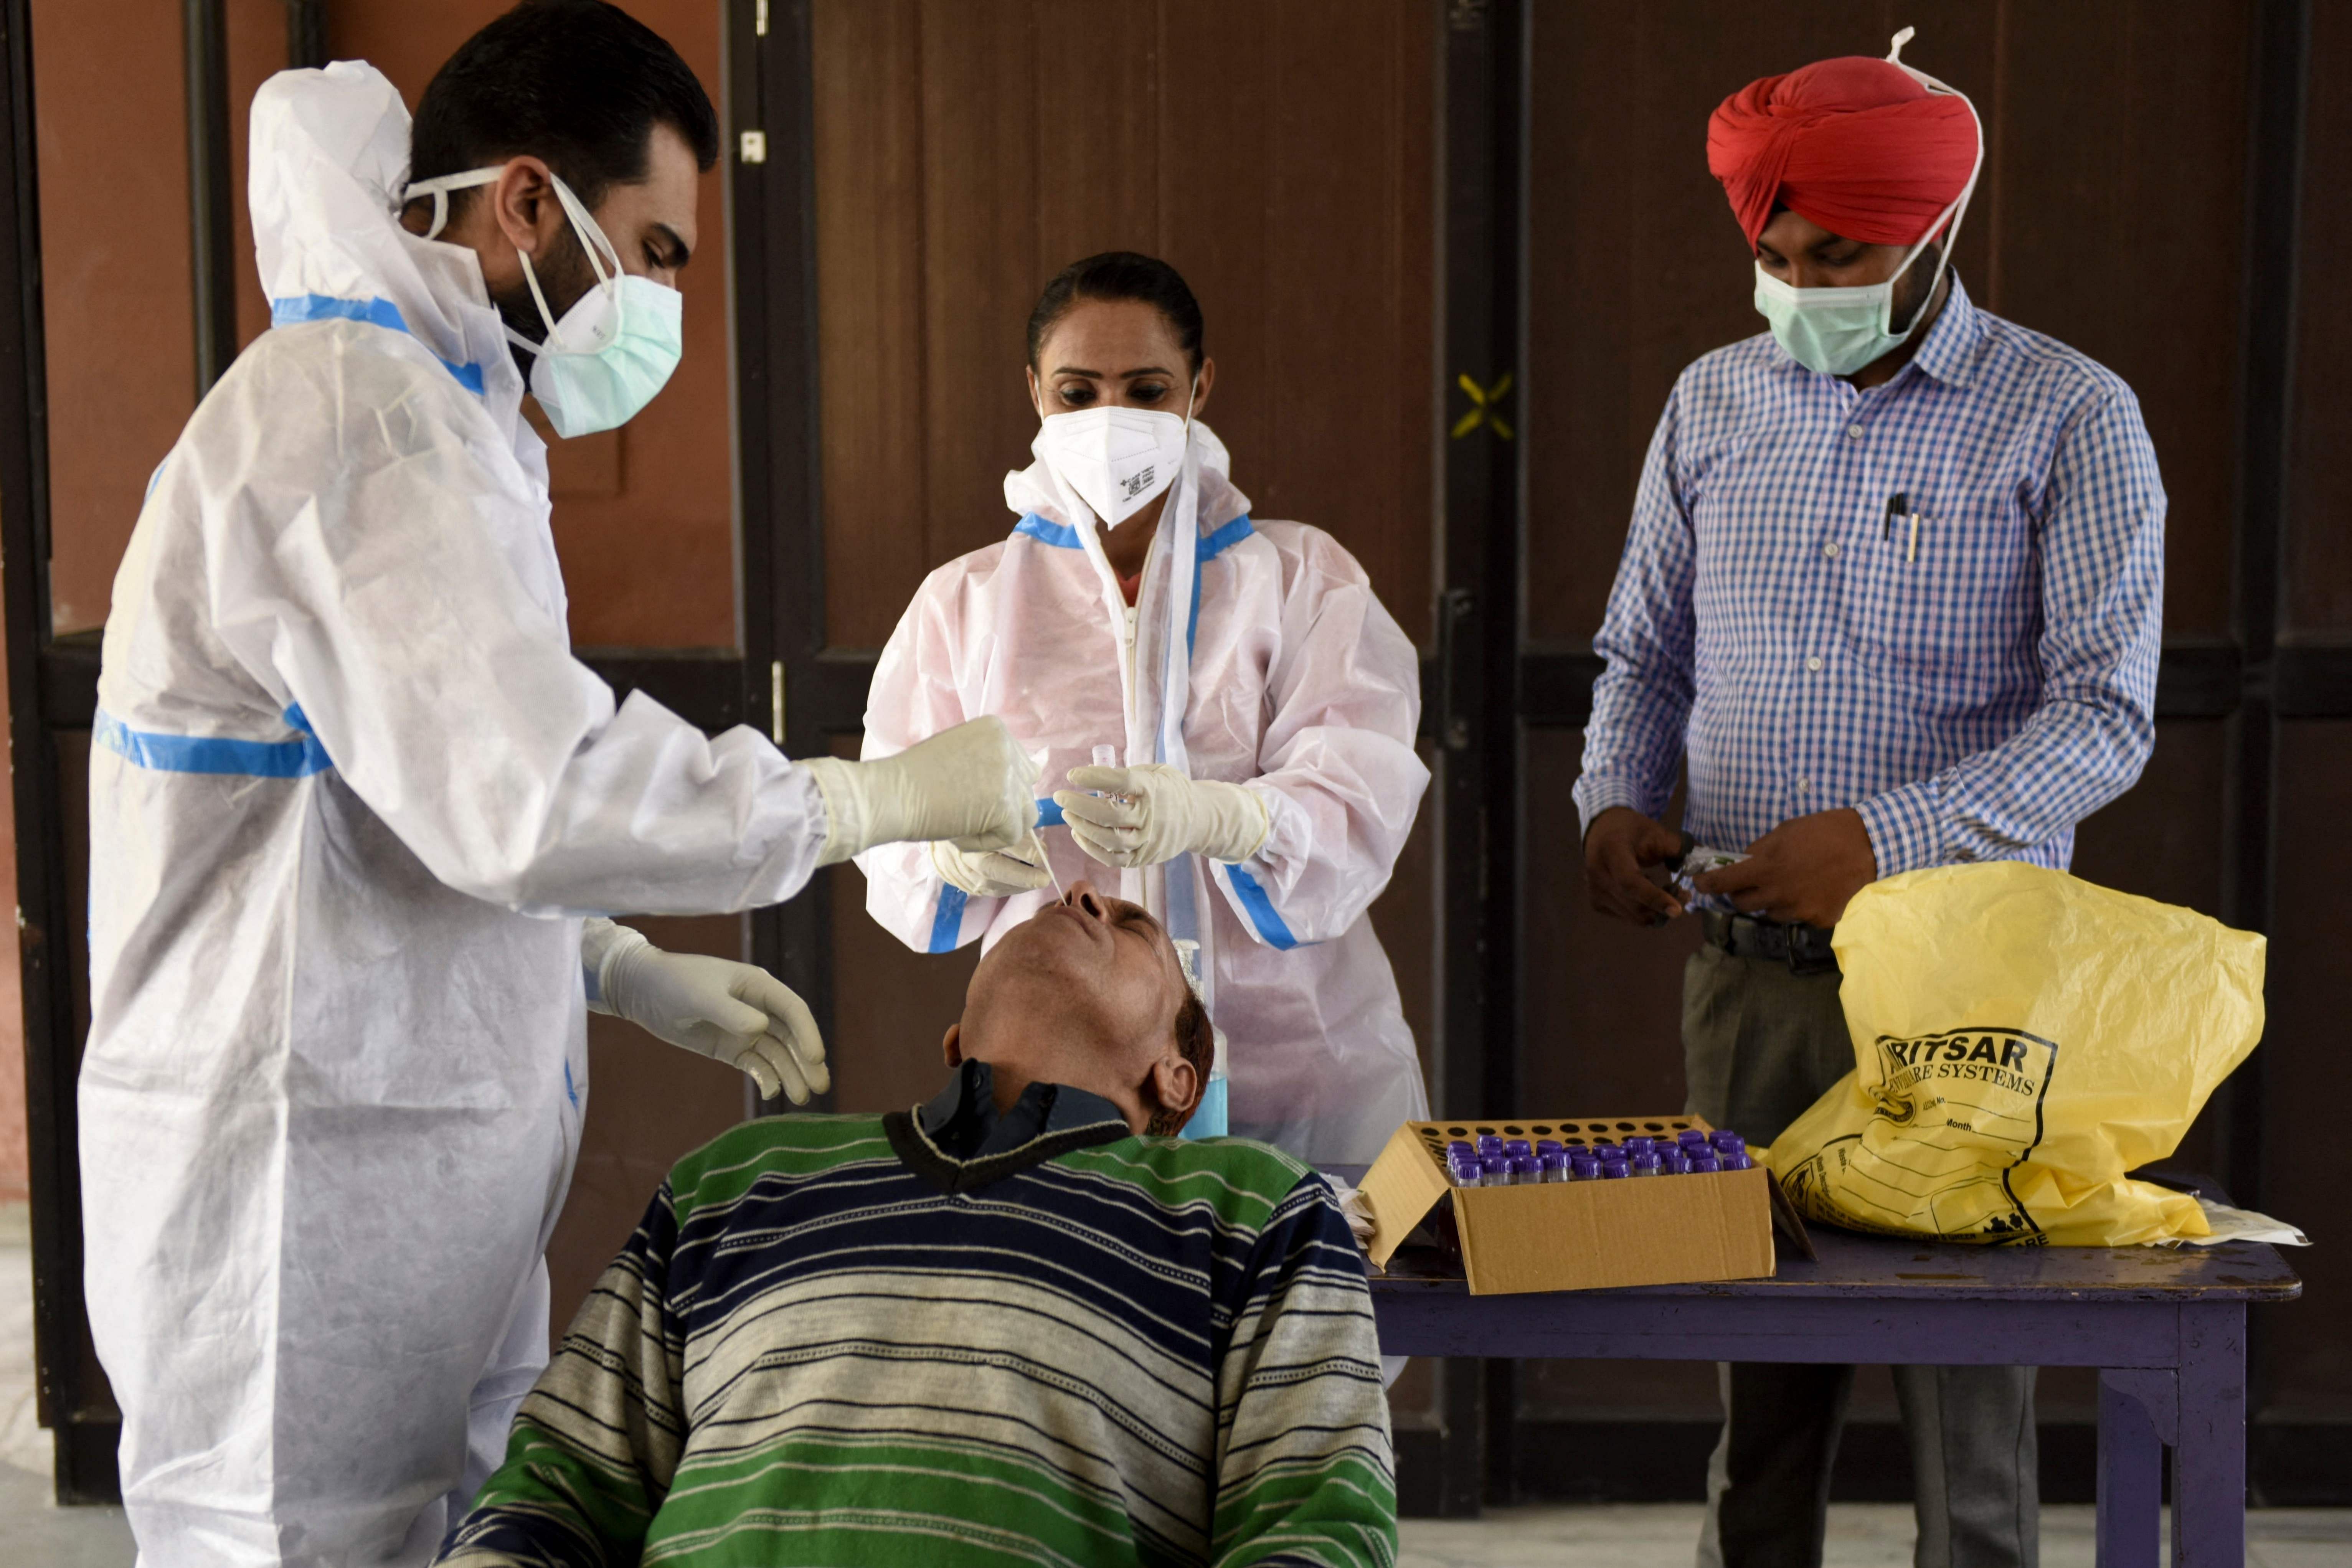 A health worker (L) collects a nasal swab sample from a teacher to test for the Covid-19 coronavirus at a school in Amritsar on February 26, 2021. Representative image/Credit: AFP Photo